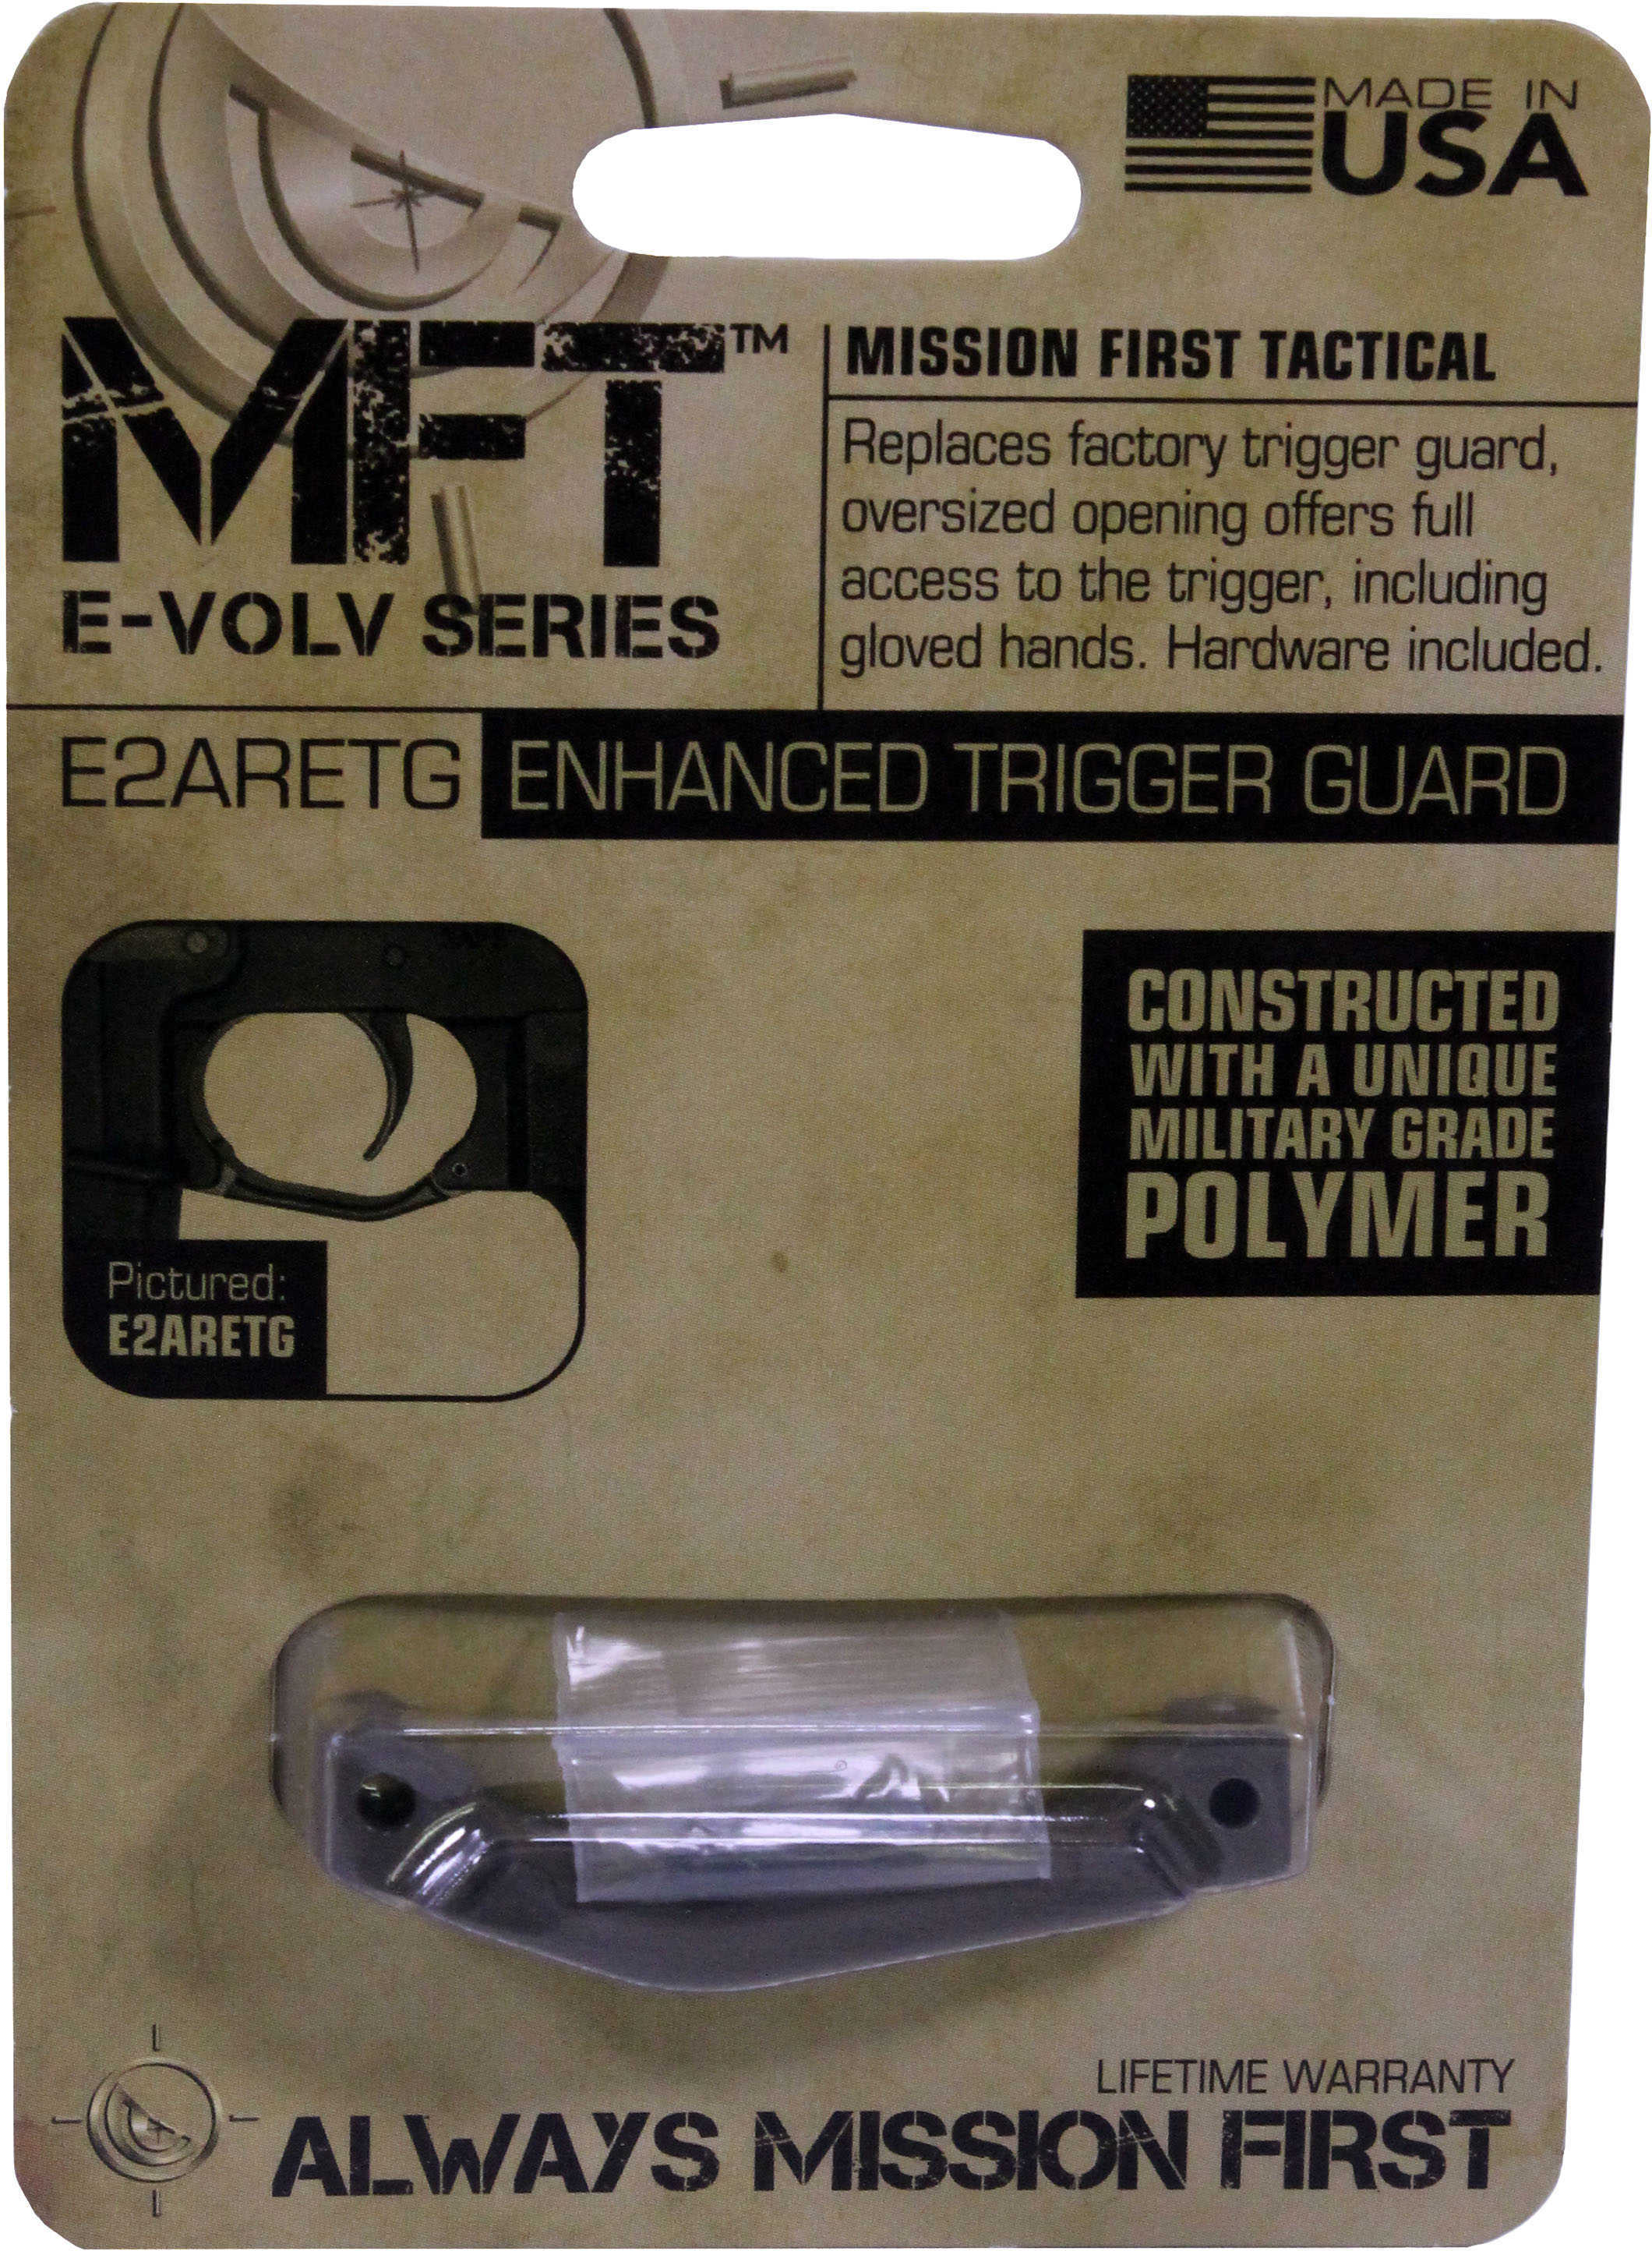 Mission First Tactical E-VolV AR15 Enhanced Trigger Guard Scorched Dark Earth Md: E2ARETGSDE